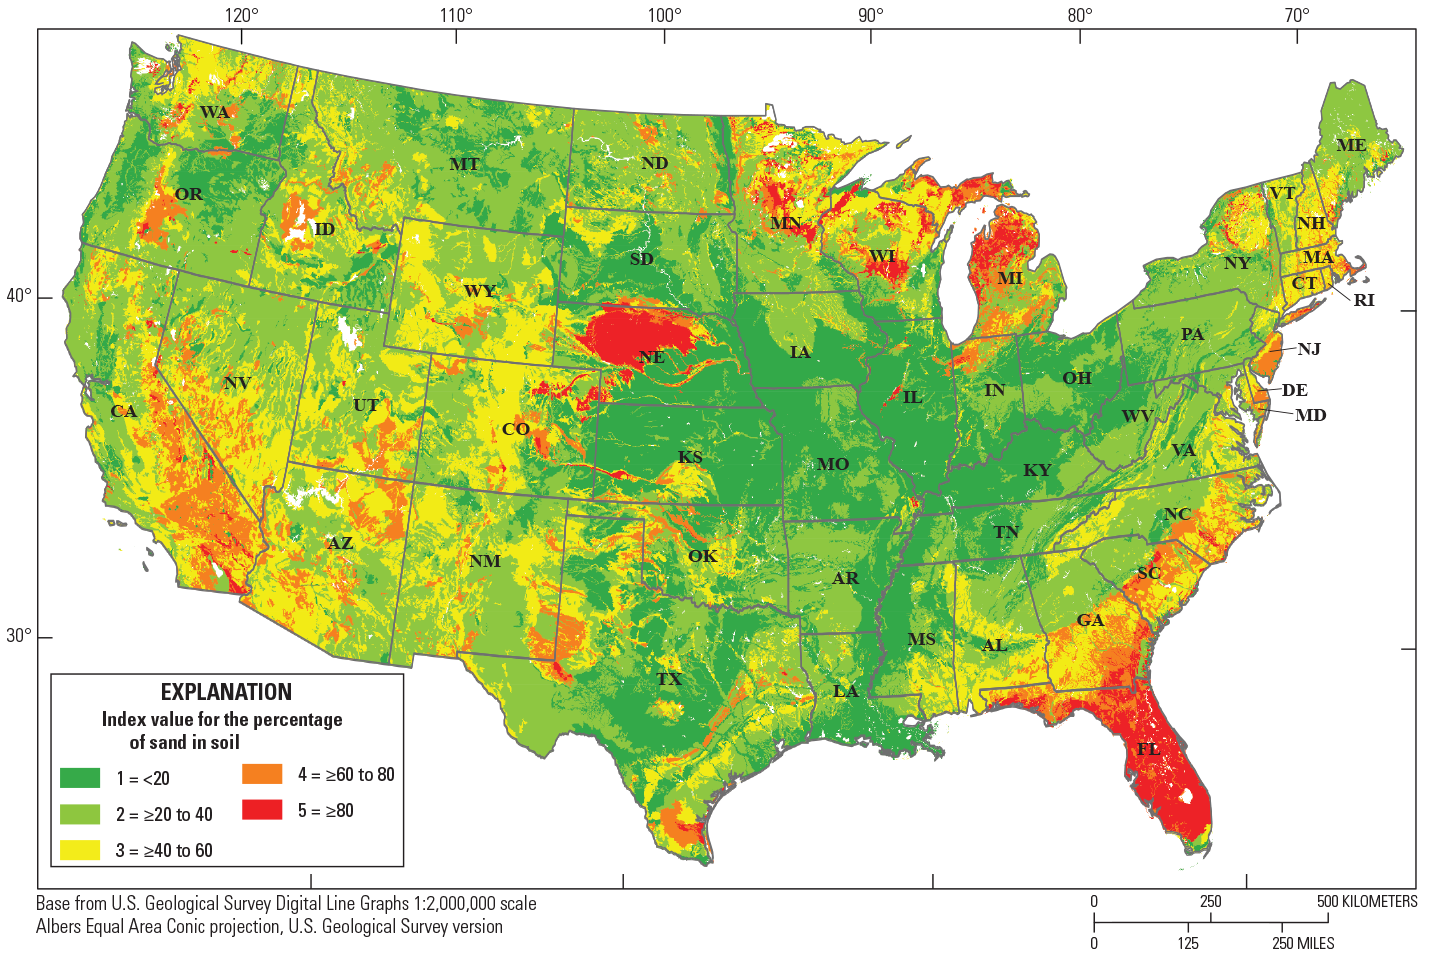 The greatest percentage of sand in soil occurs along the east coast, the upper Midwest,
                        and sedimentary basins of the western United States